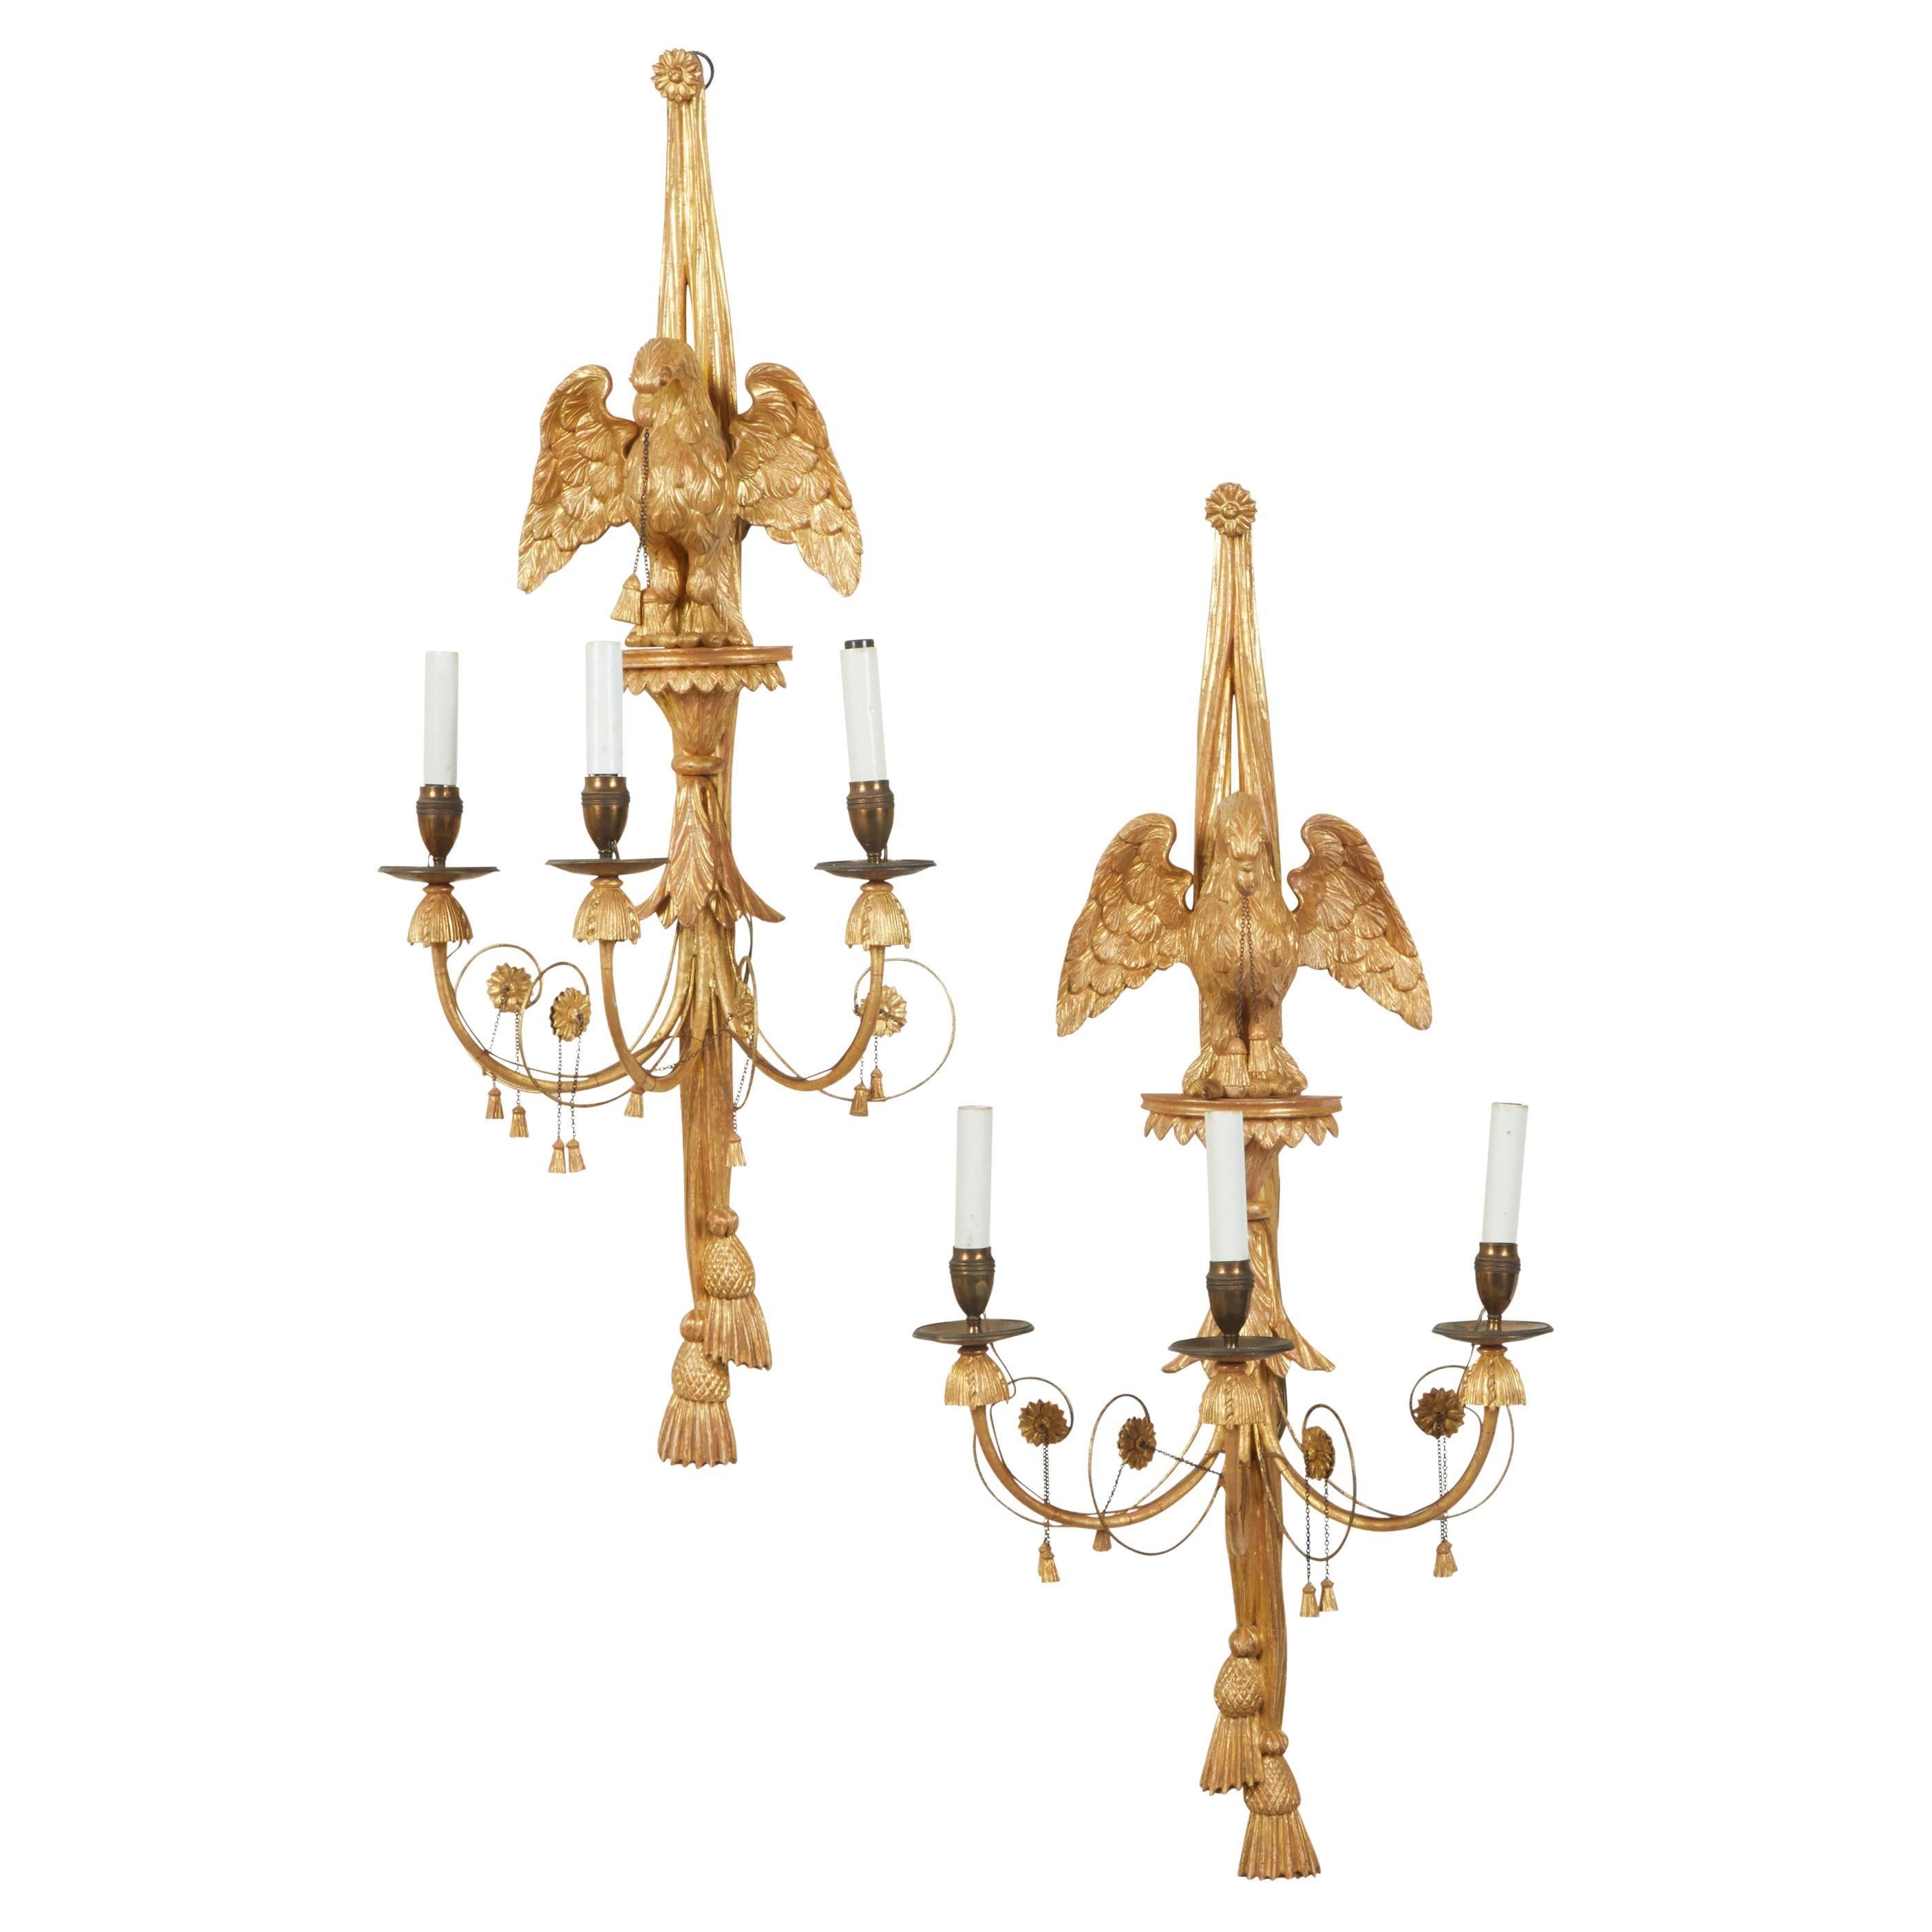 Pair of English 19th Century Three-Light Giltwood Sconces with Carved Eagles